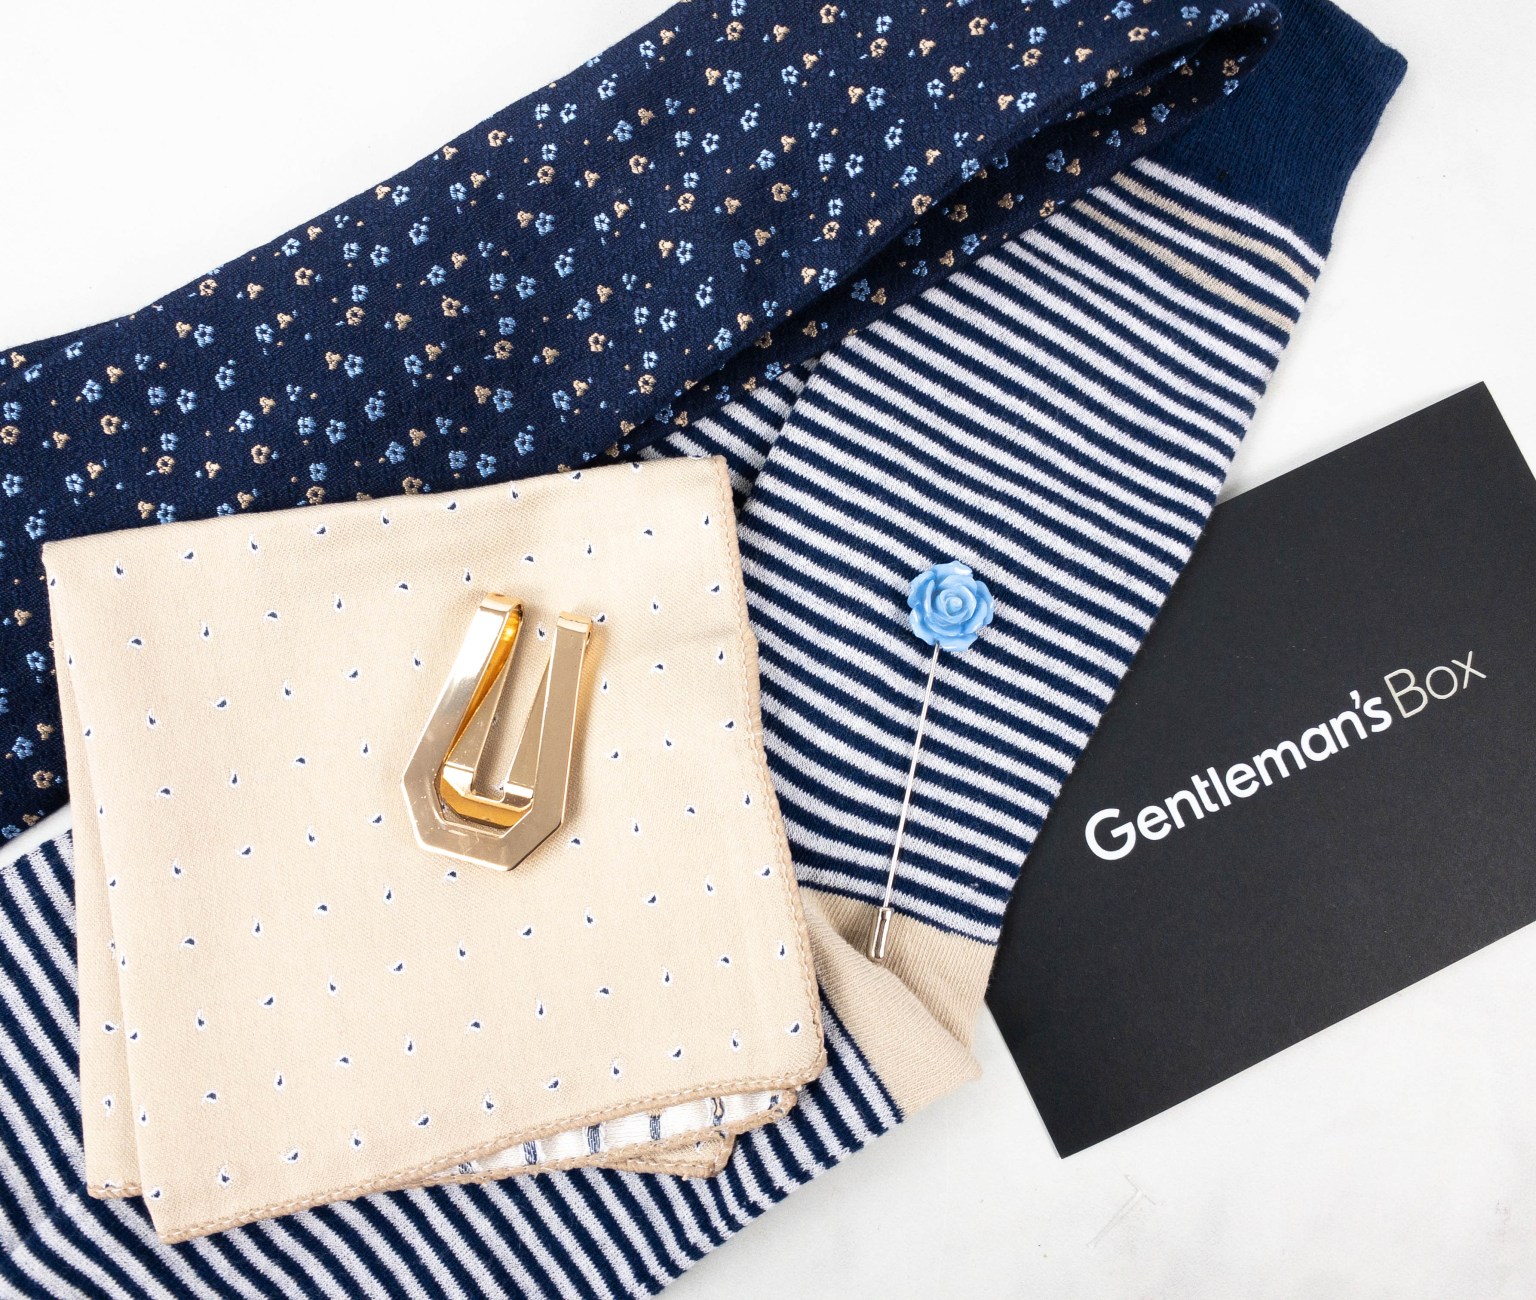 The Gentleman's Box Reviews: Get All The Details At Hello Subscription!